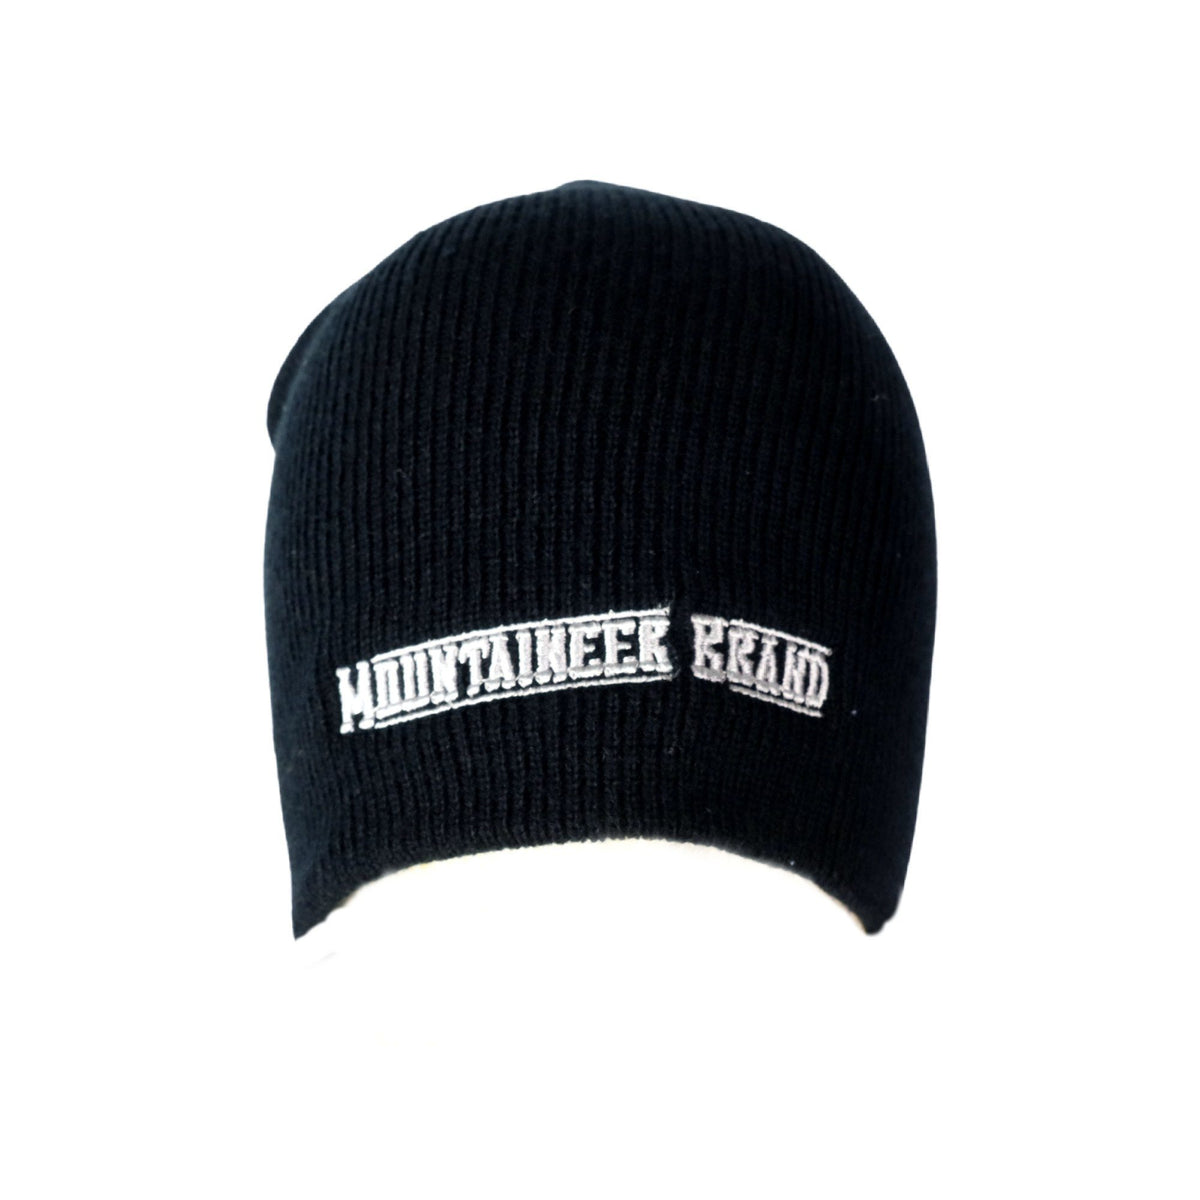 Mountaineer Brand Beanie Knit Hat – Mountaineer Brand Products | Beanies